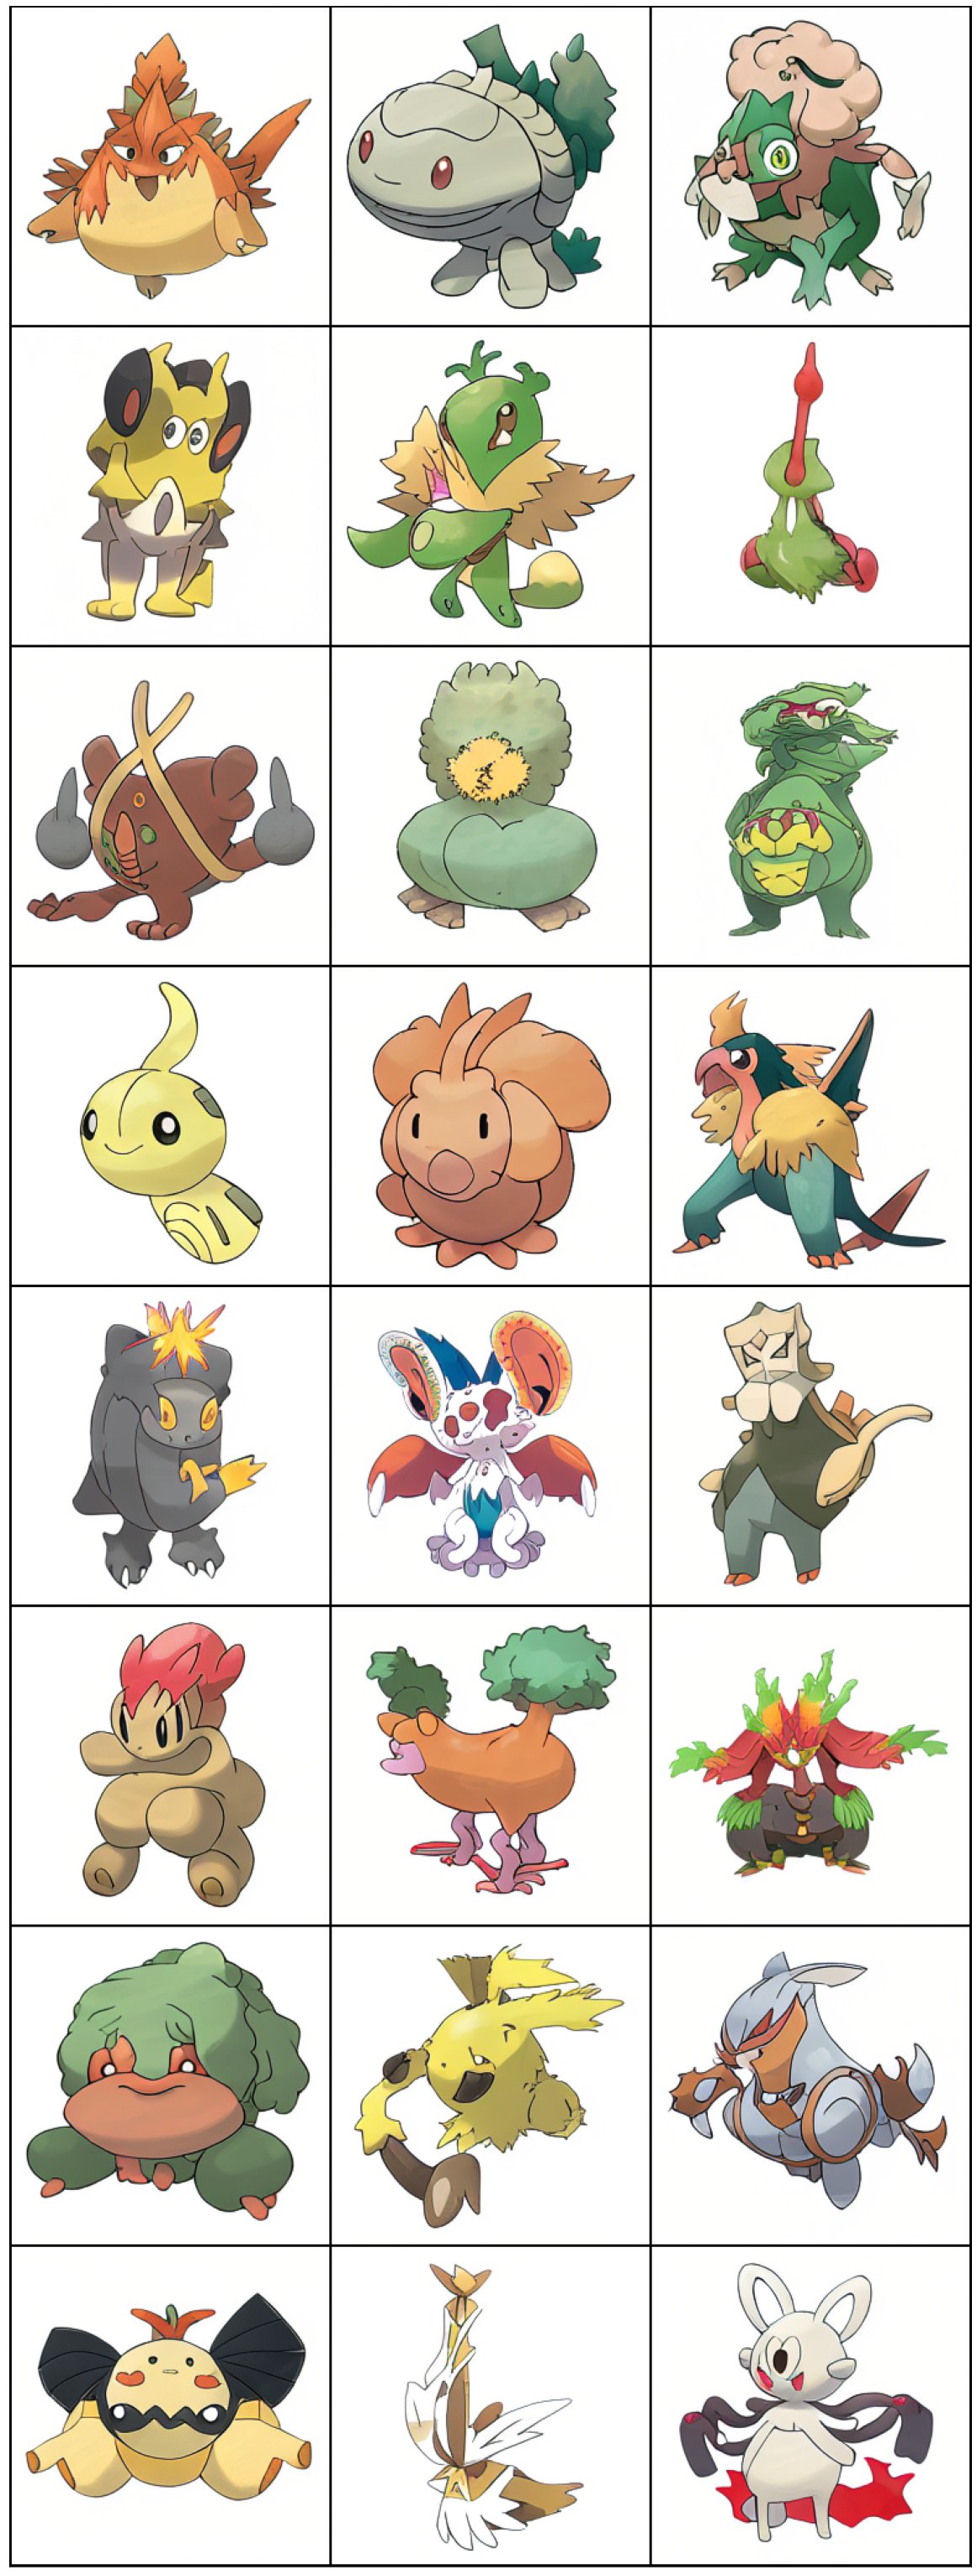 Max Woolf Wow You All Really Really Like These Ai Generated Pokemon As A Thanks For All Your Support How About Another Bonus Batch T Co Km3kc8bbe6 Twitter